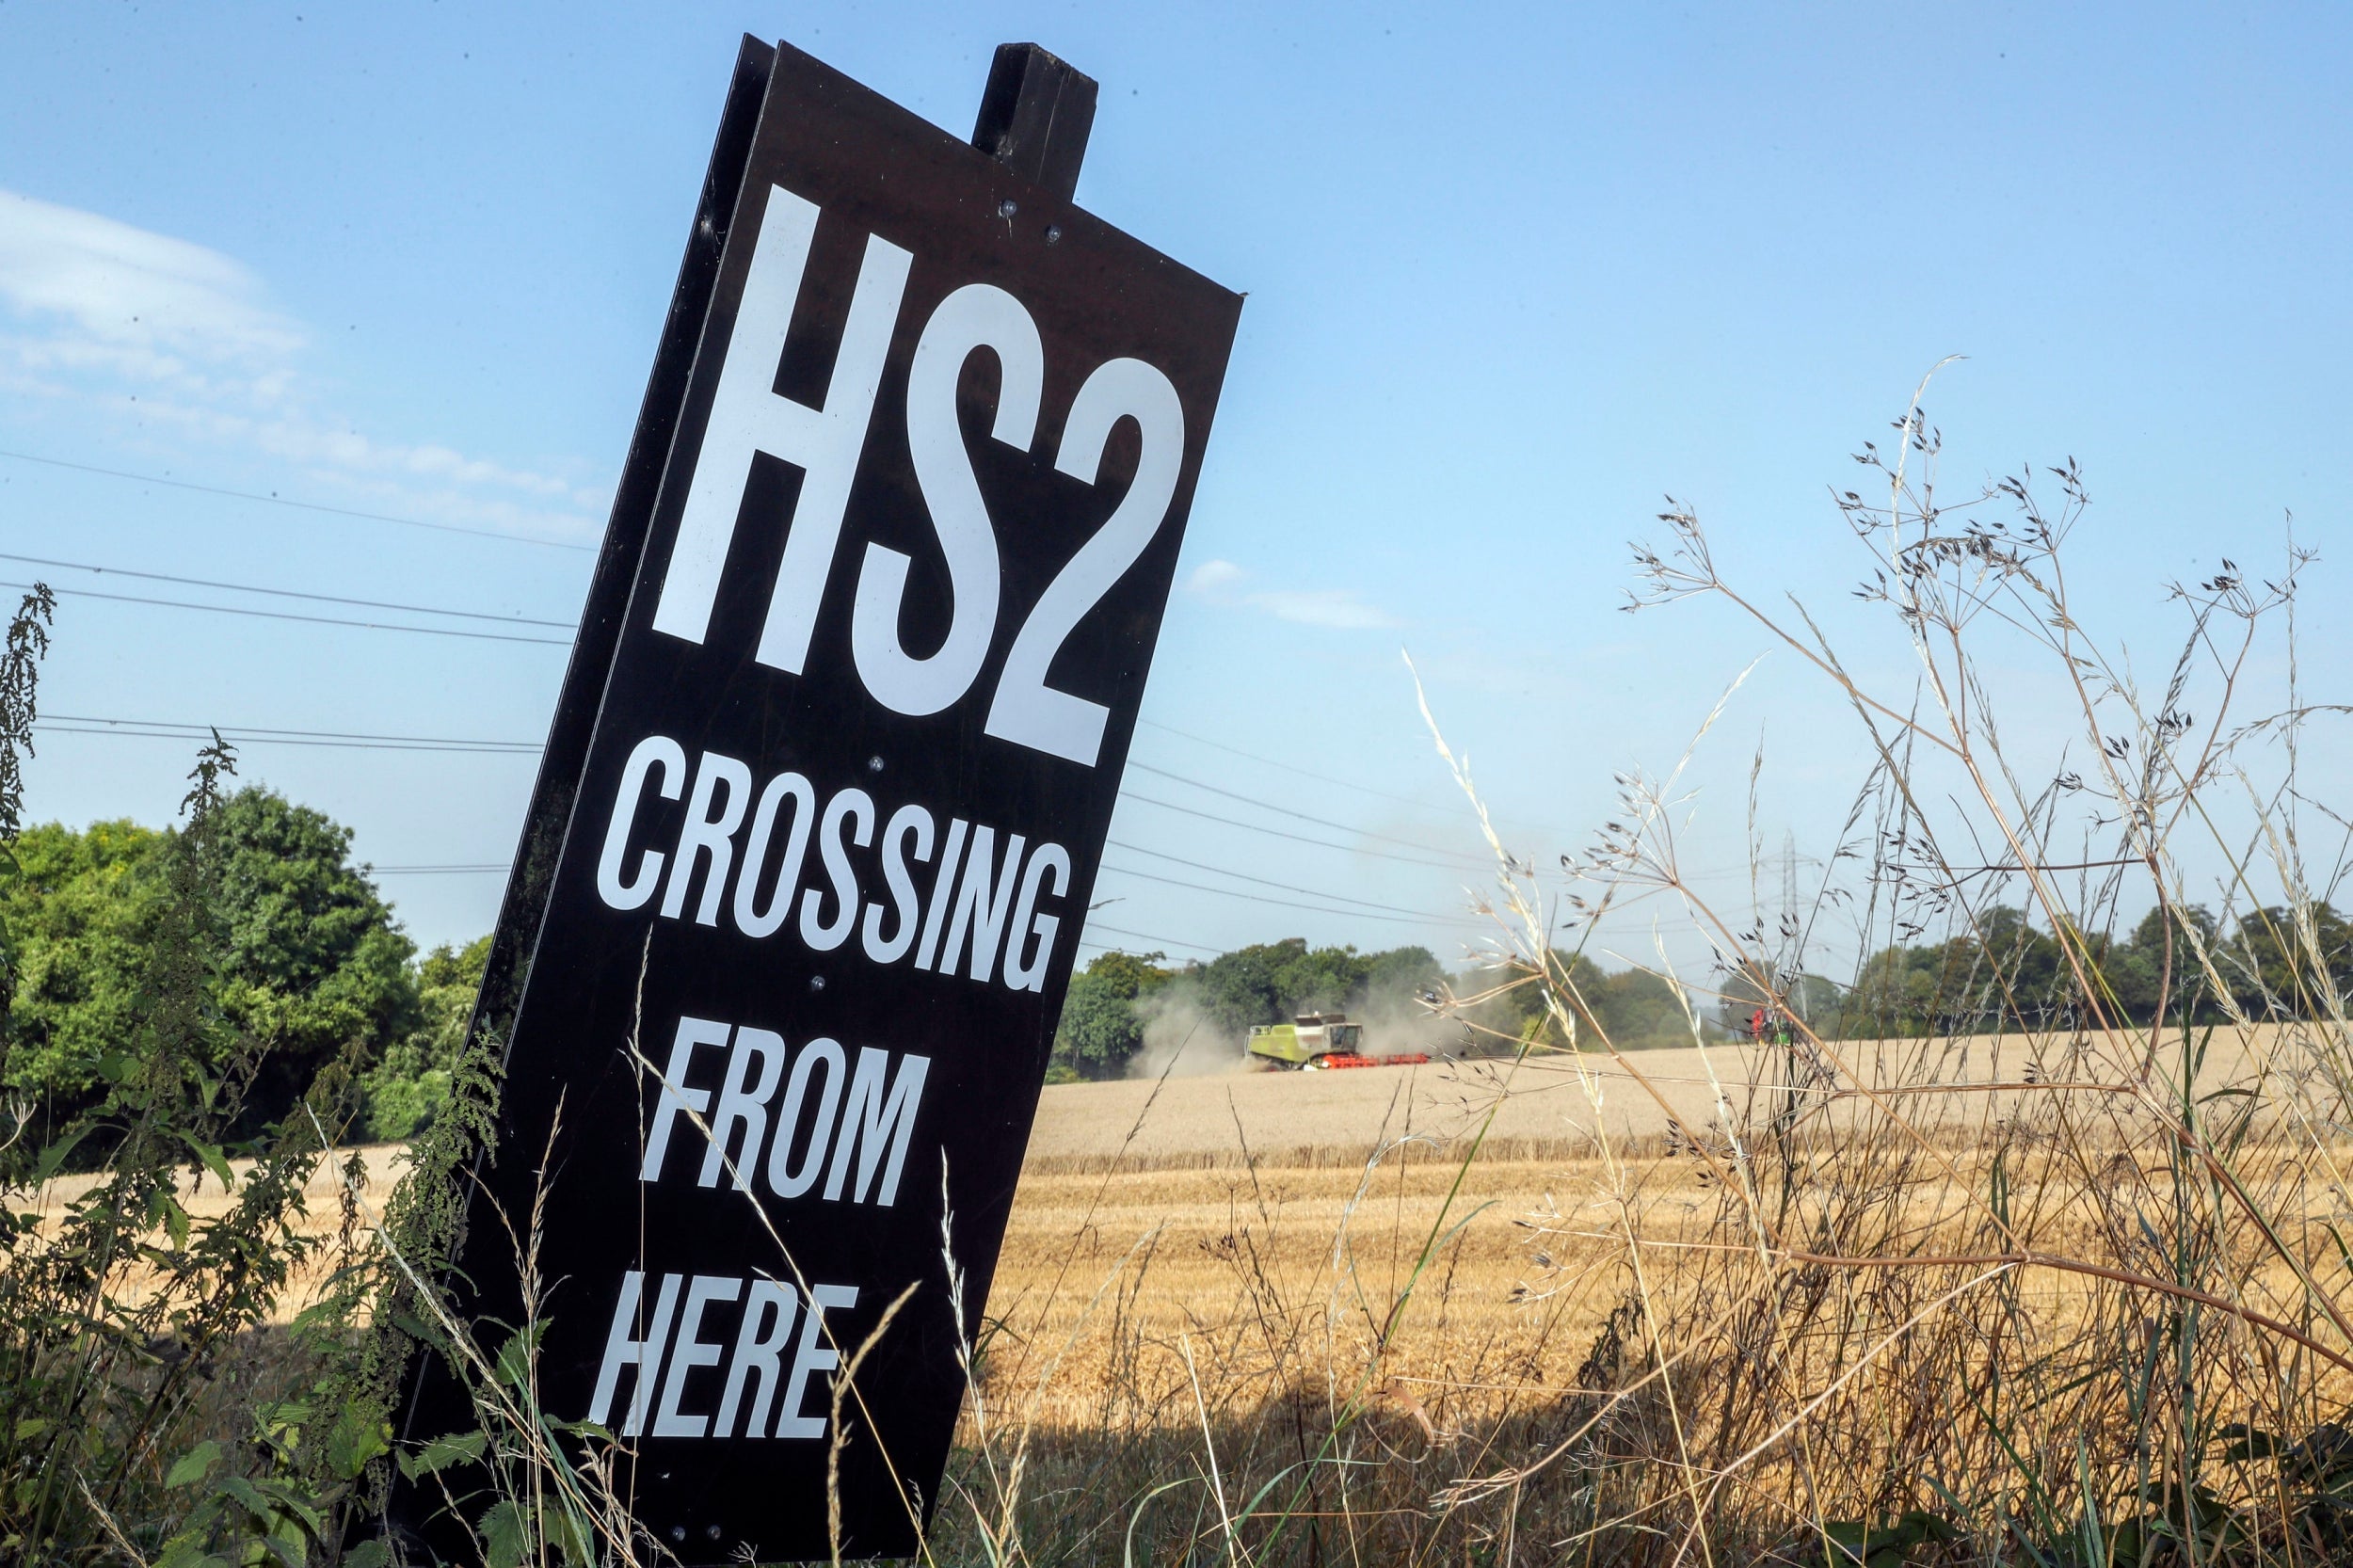 The HS2 project has saddled the government with £2.1bn in unexpected costs